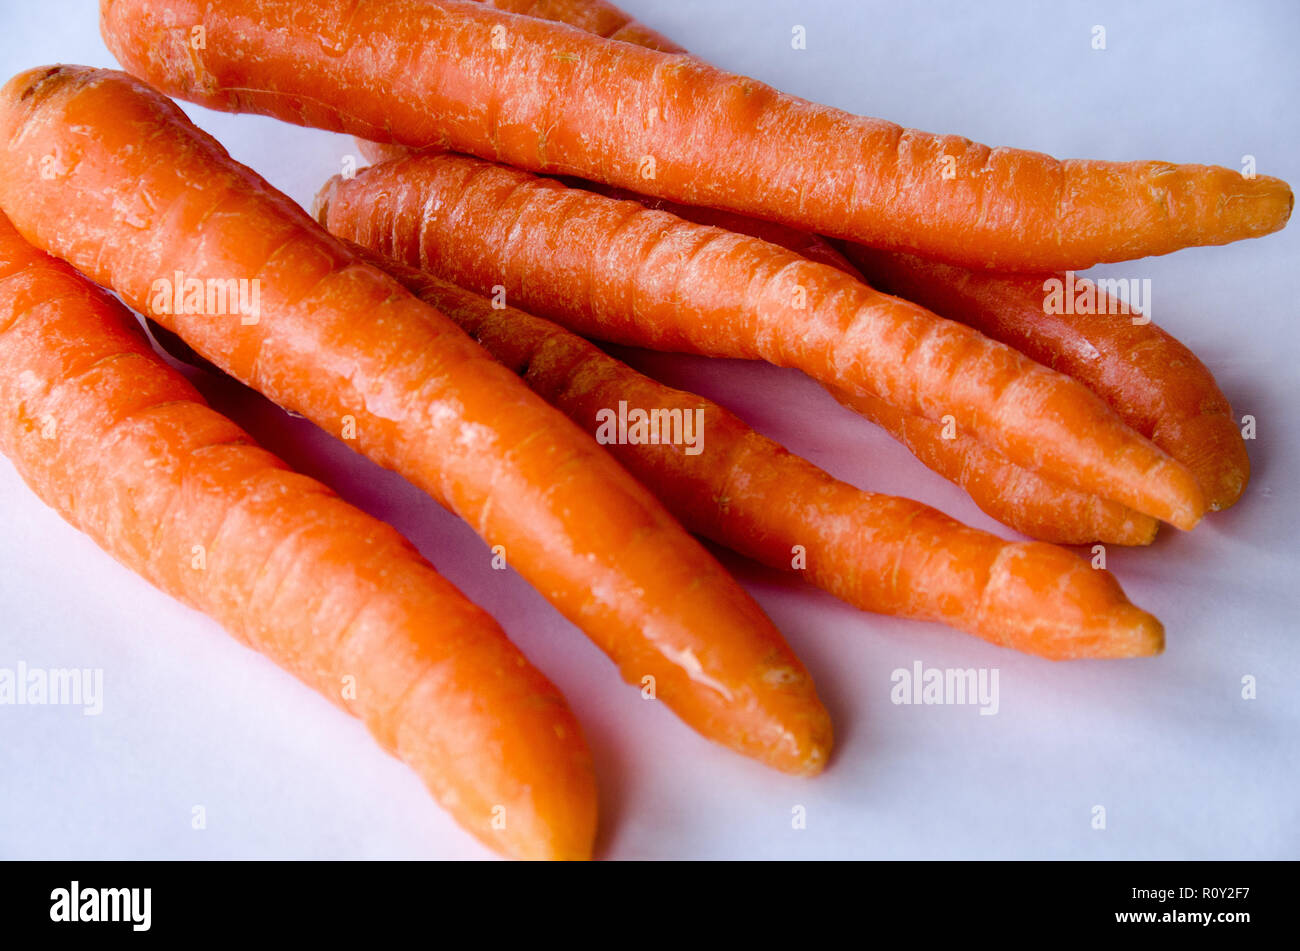 Carrots in group on white background Stock Photo